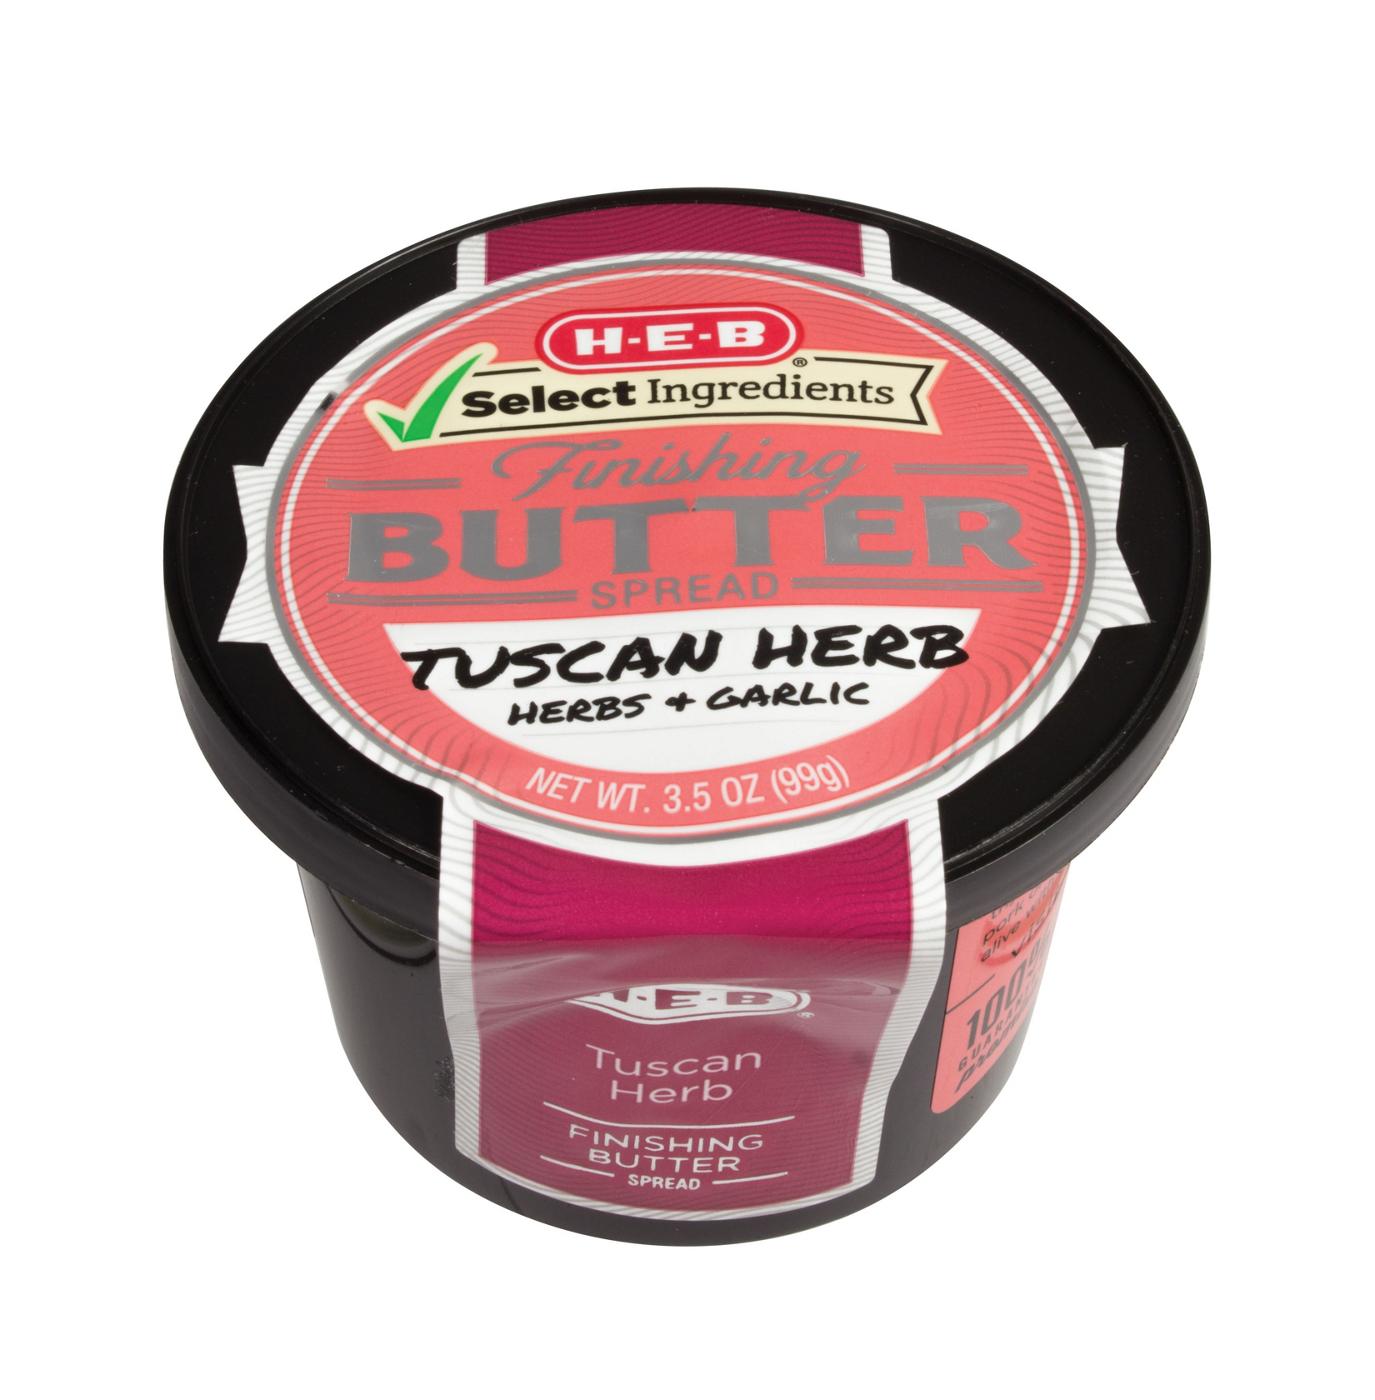 H-E-B Tuscan Herb Finishing Butter; image 1 of 2